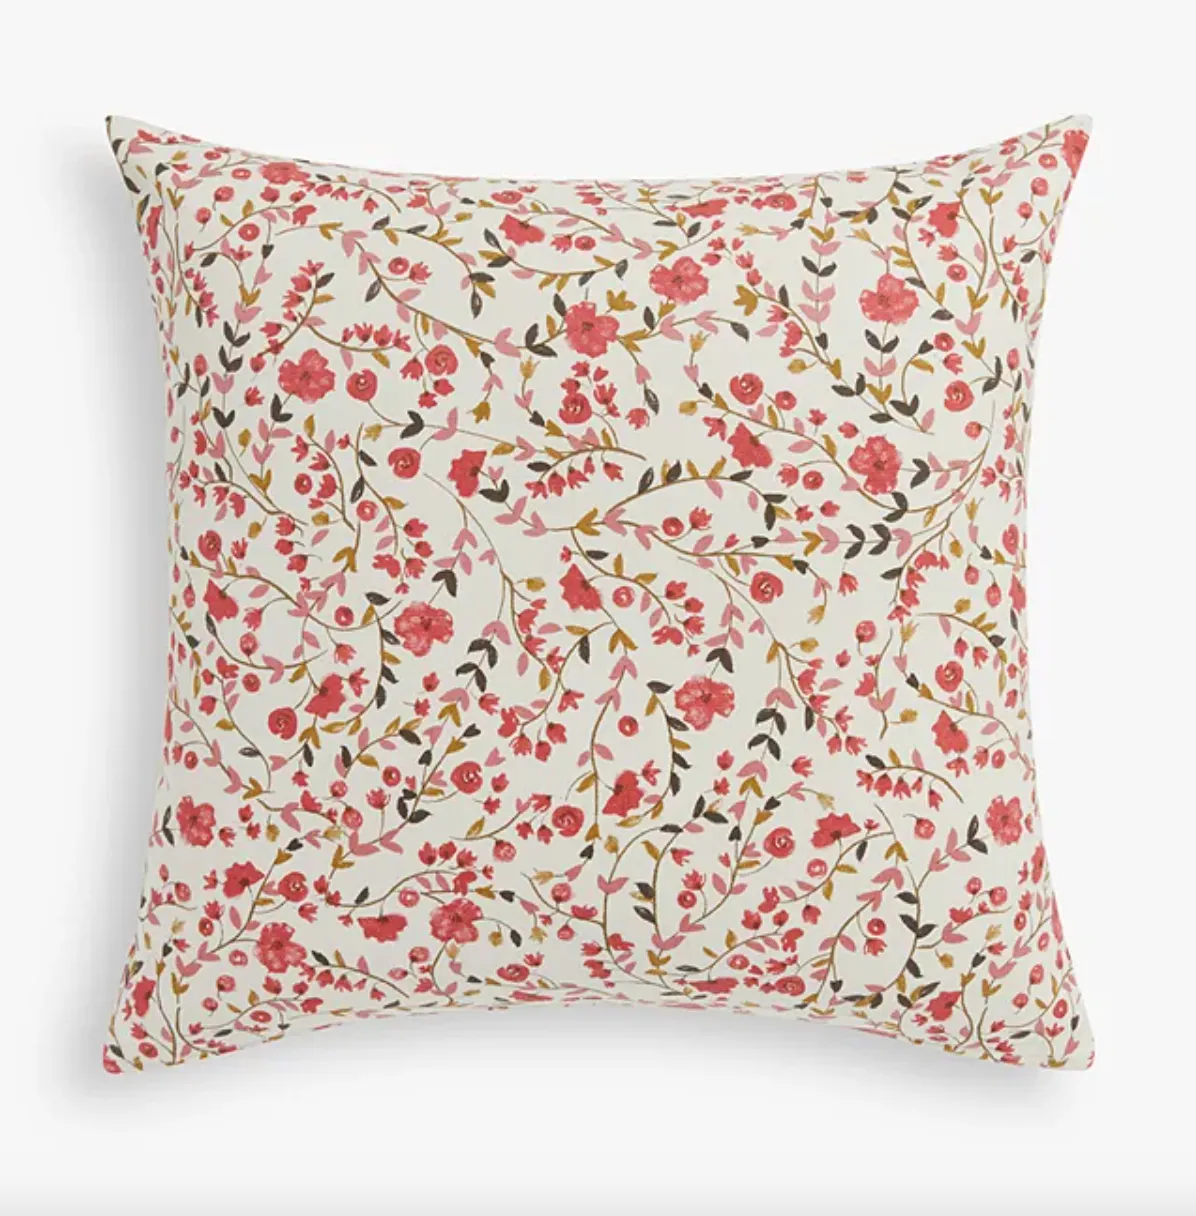 Trailing Floral Indoor/Outdoor Cushion, Pink, John Lewis